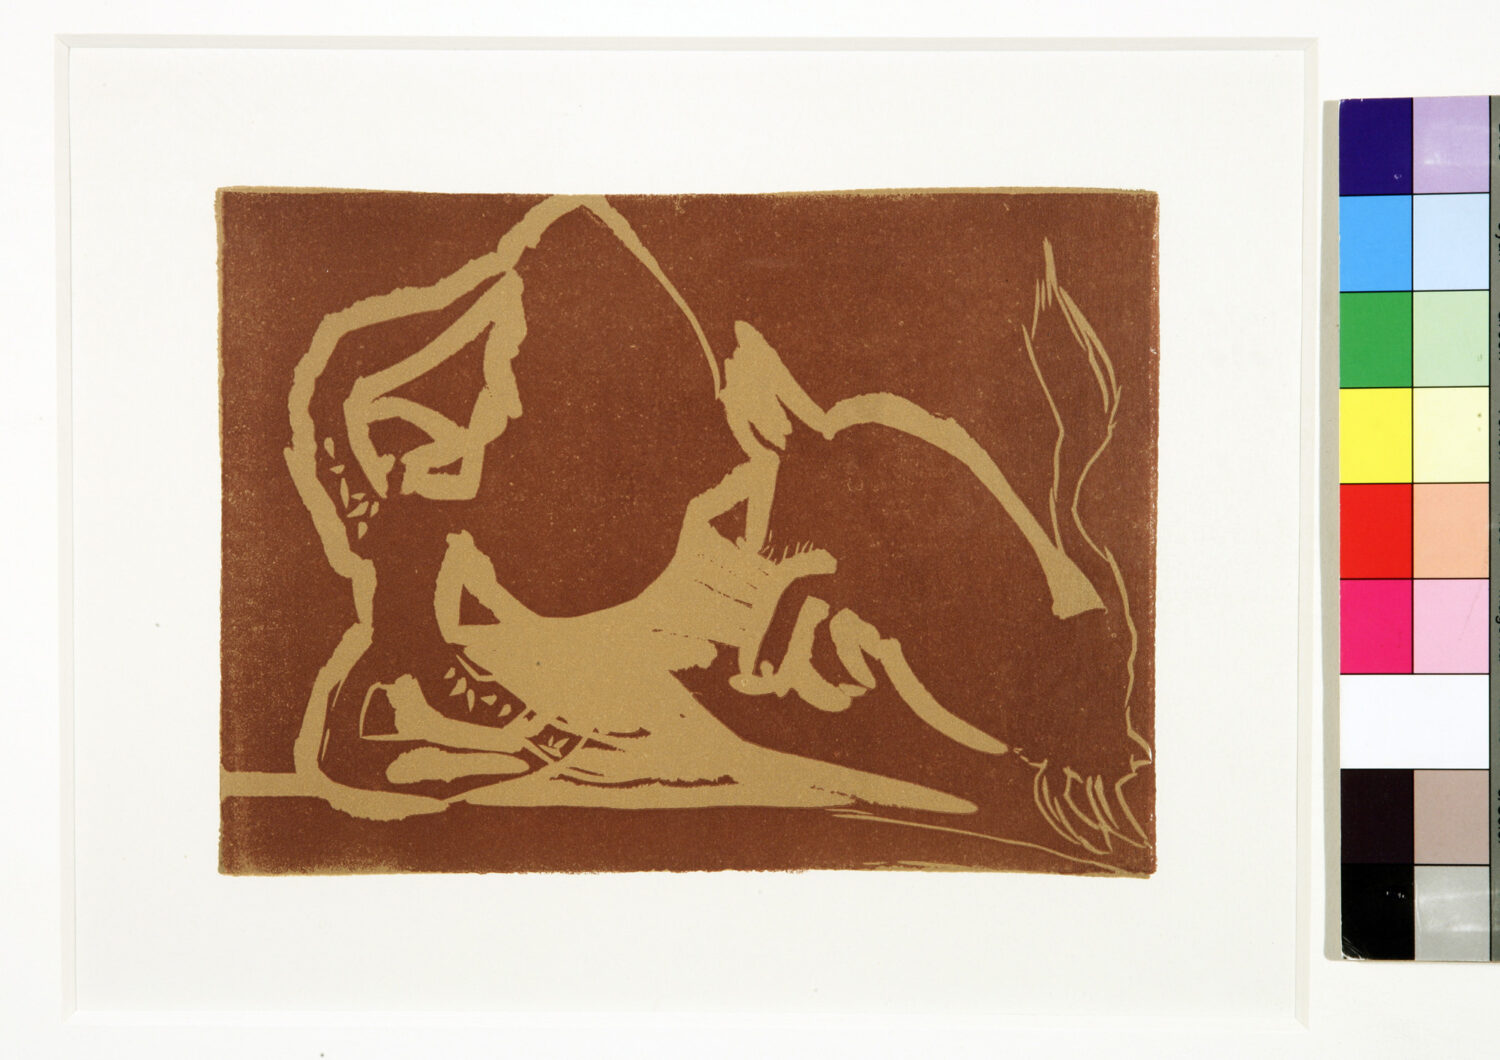 thumbnail of Lino-cut by Pablo Picasso titled Farol.